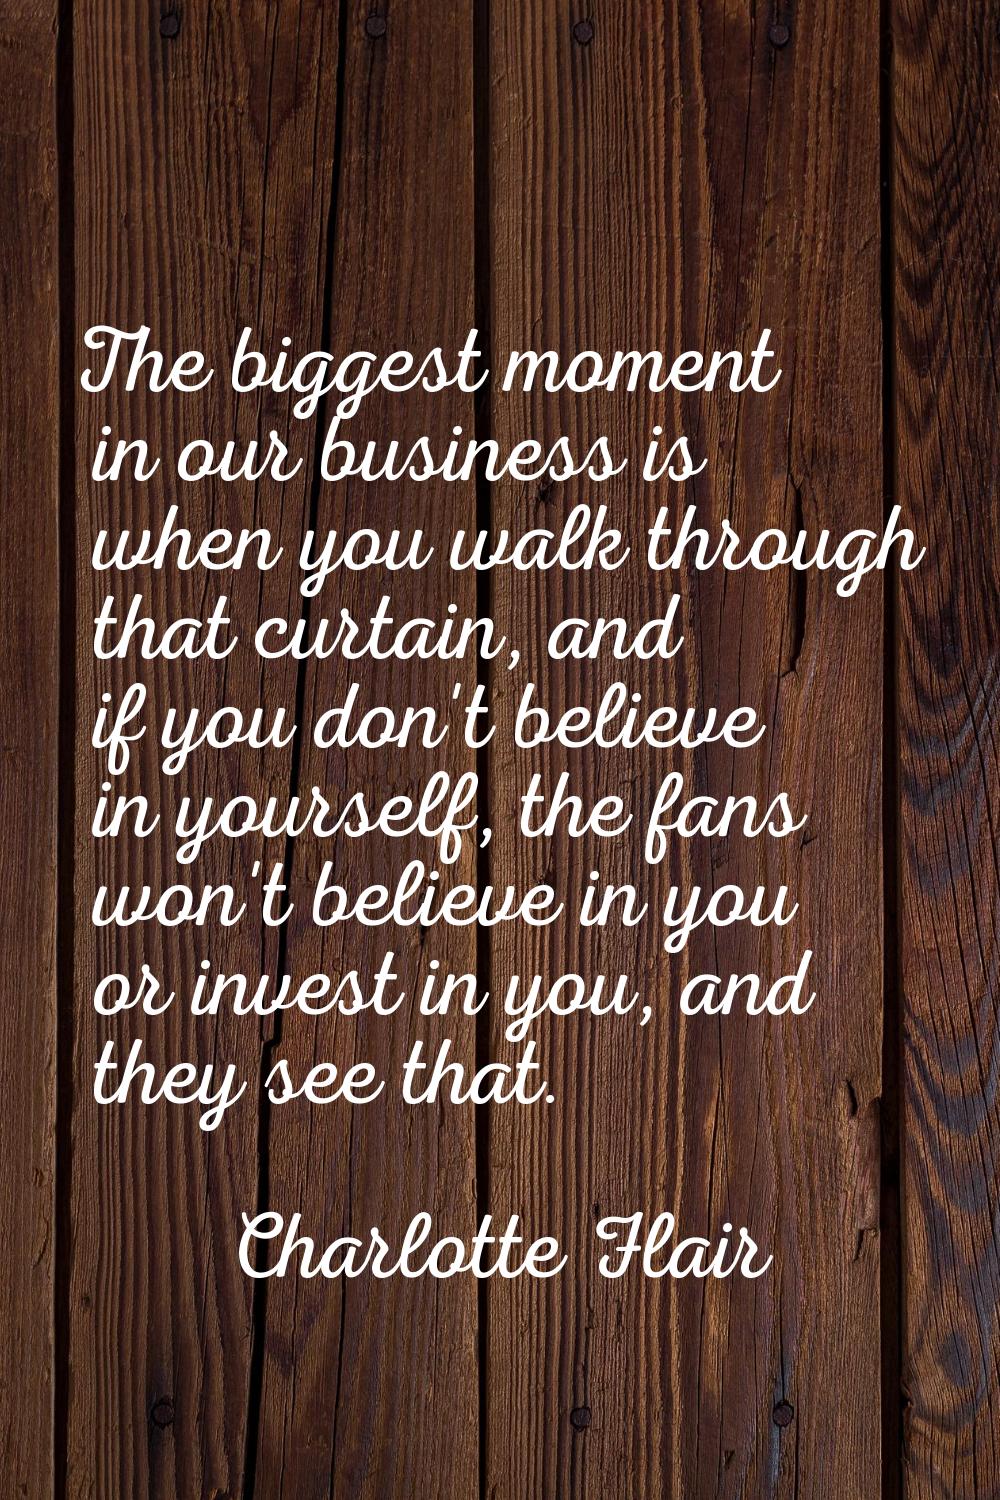 The biggest moment in our business is when you walk through that curtain, and if you don't believe 